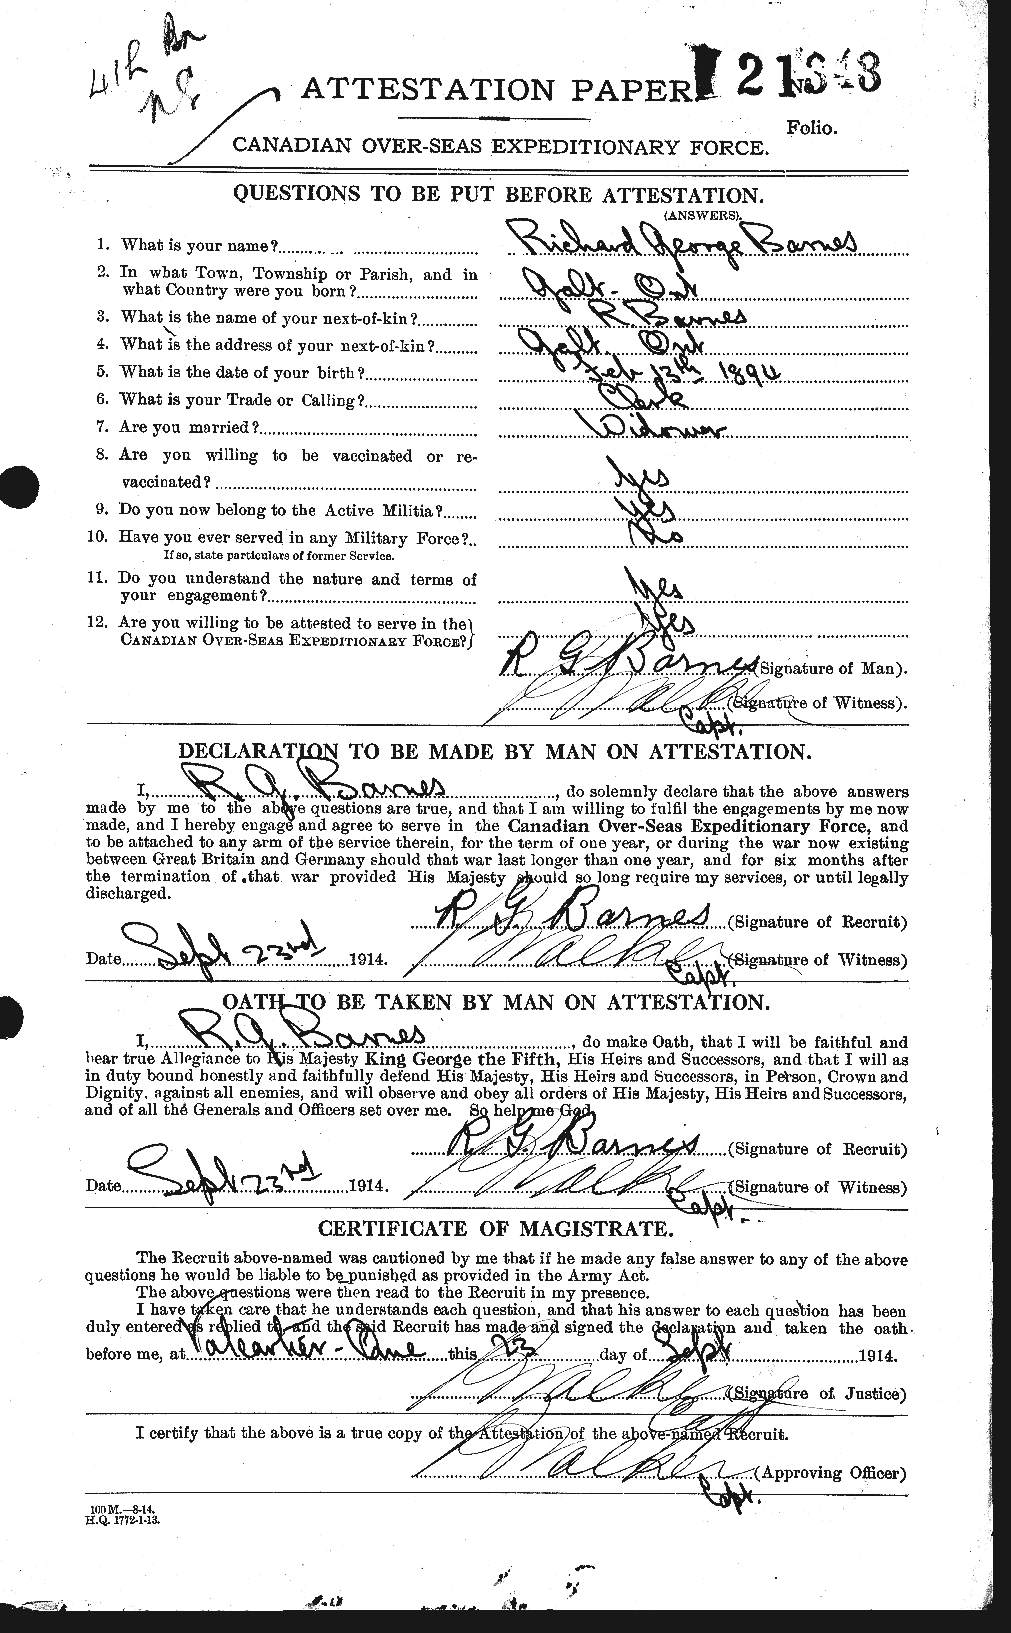 Personnel Records of the First World War - CEF 227381a